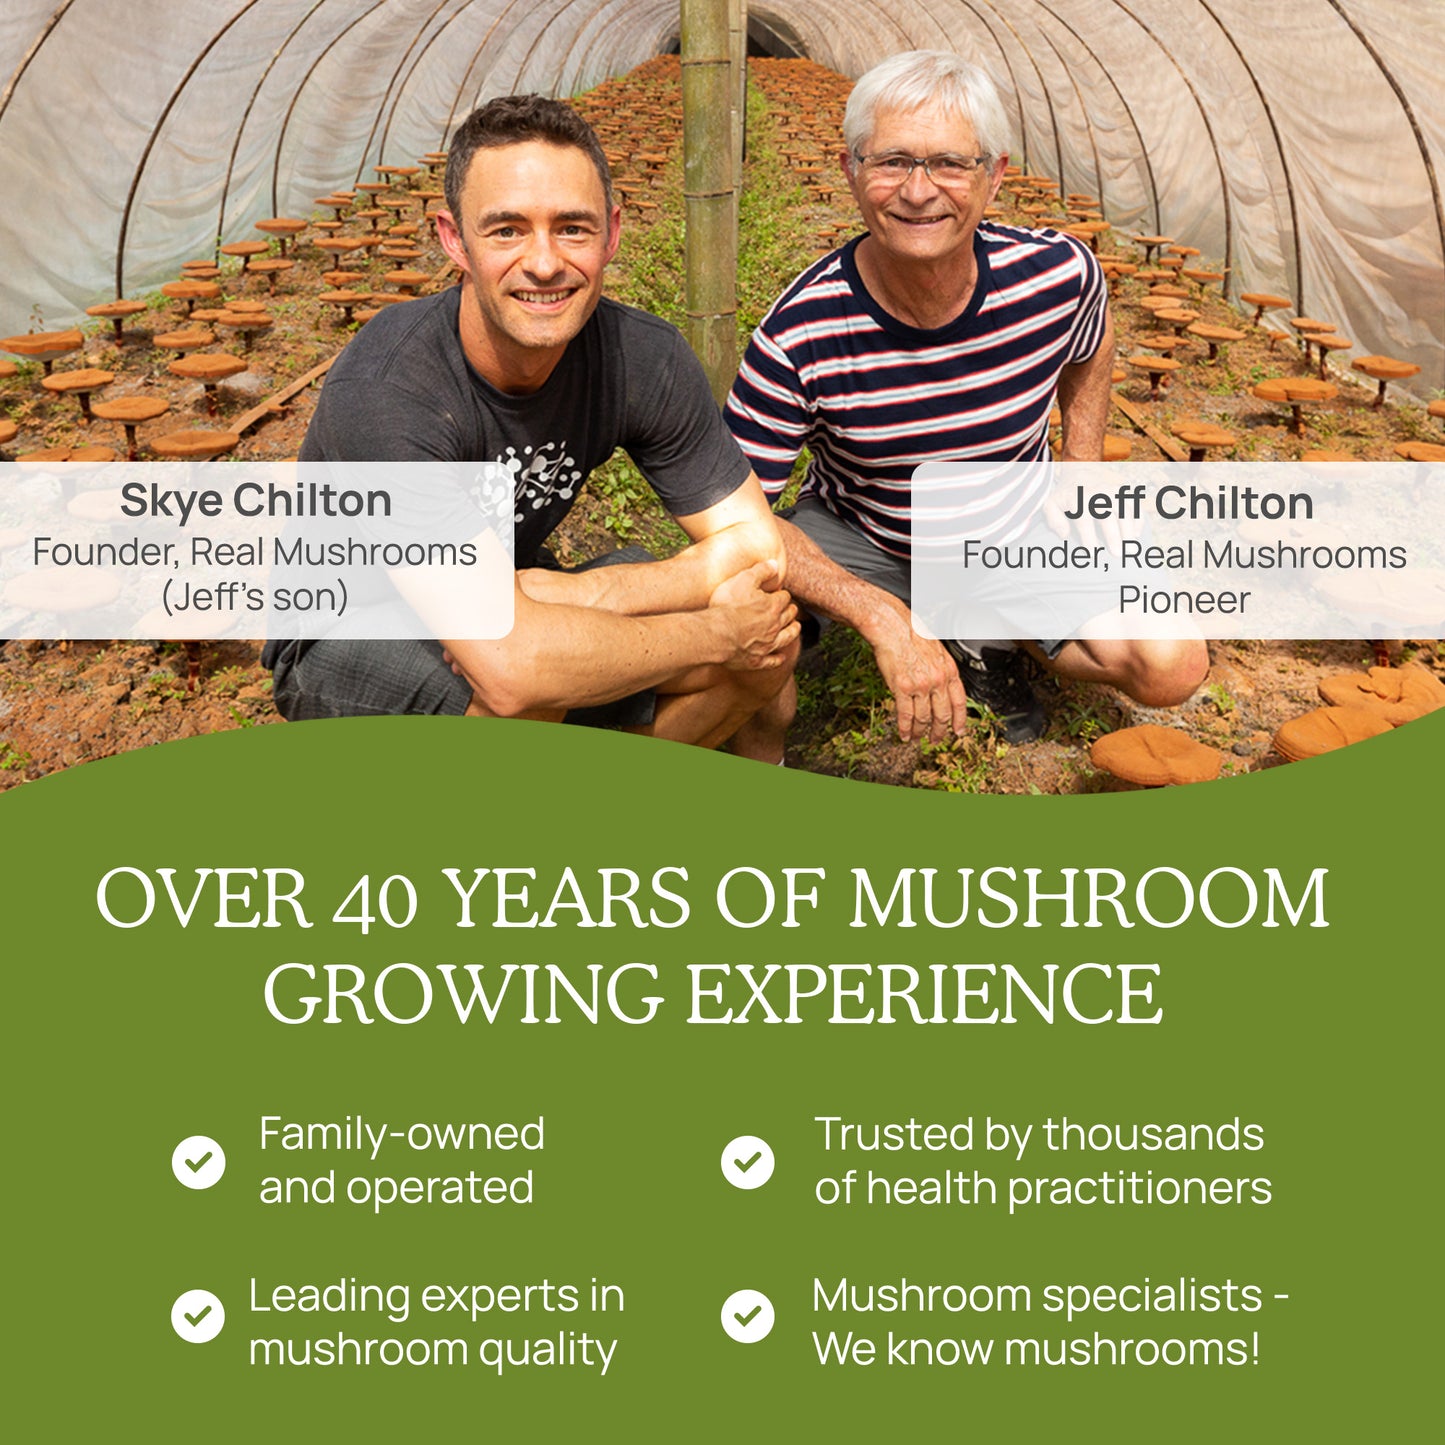 Two men smiling inside Real Mushrooms' certified organic mushroom growing facility, with text highlighting over 40 years of mushroom growing experience and their roles in a family-owned business.